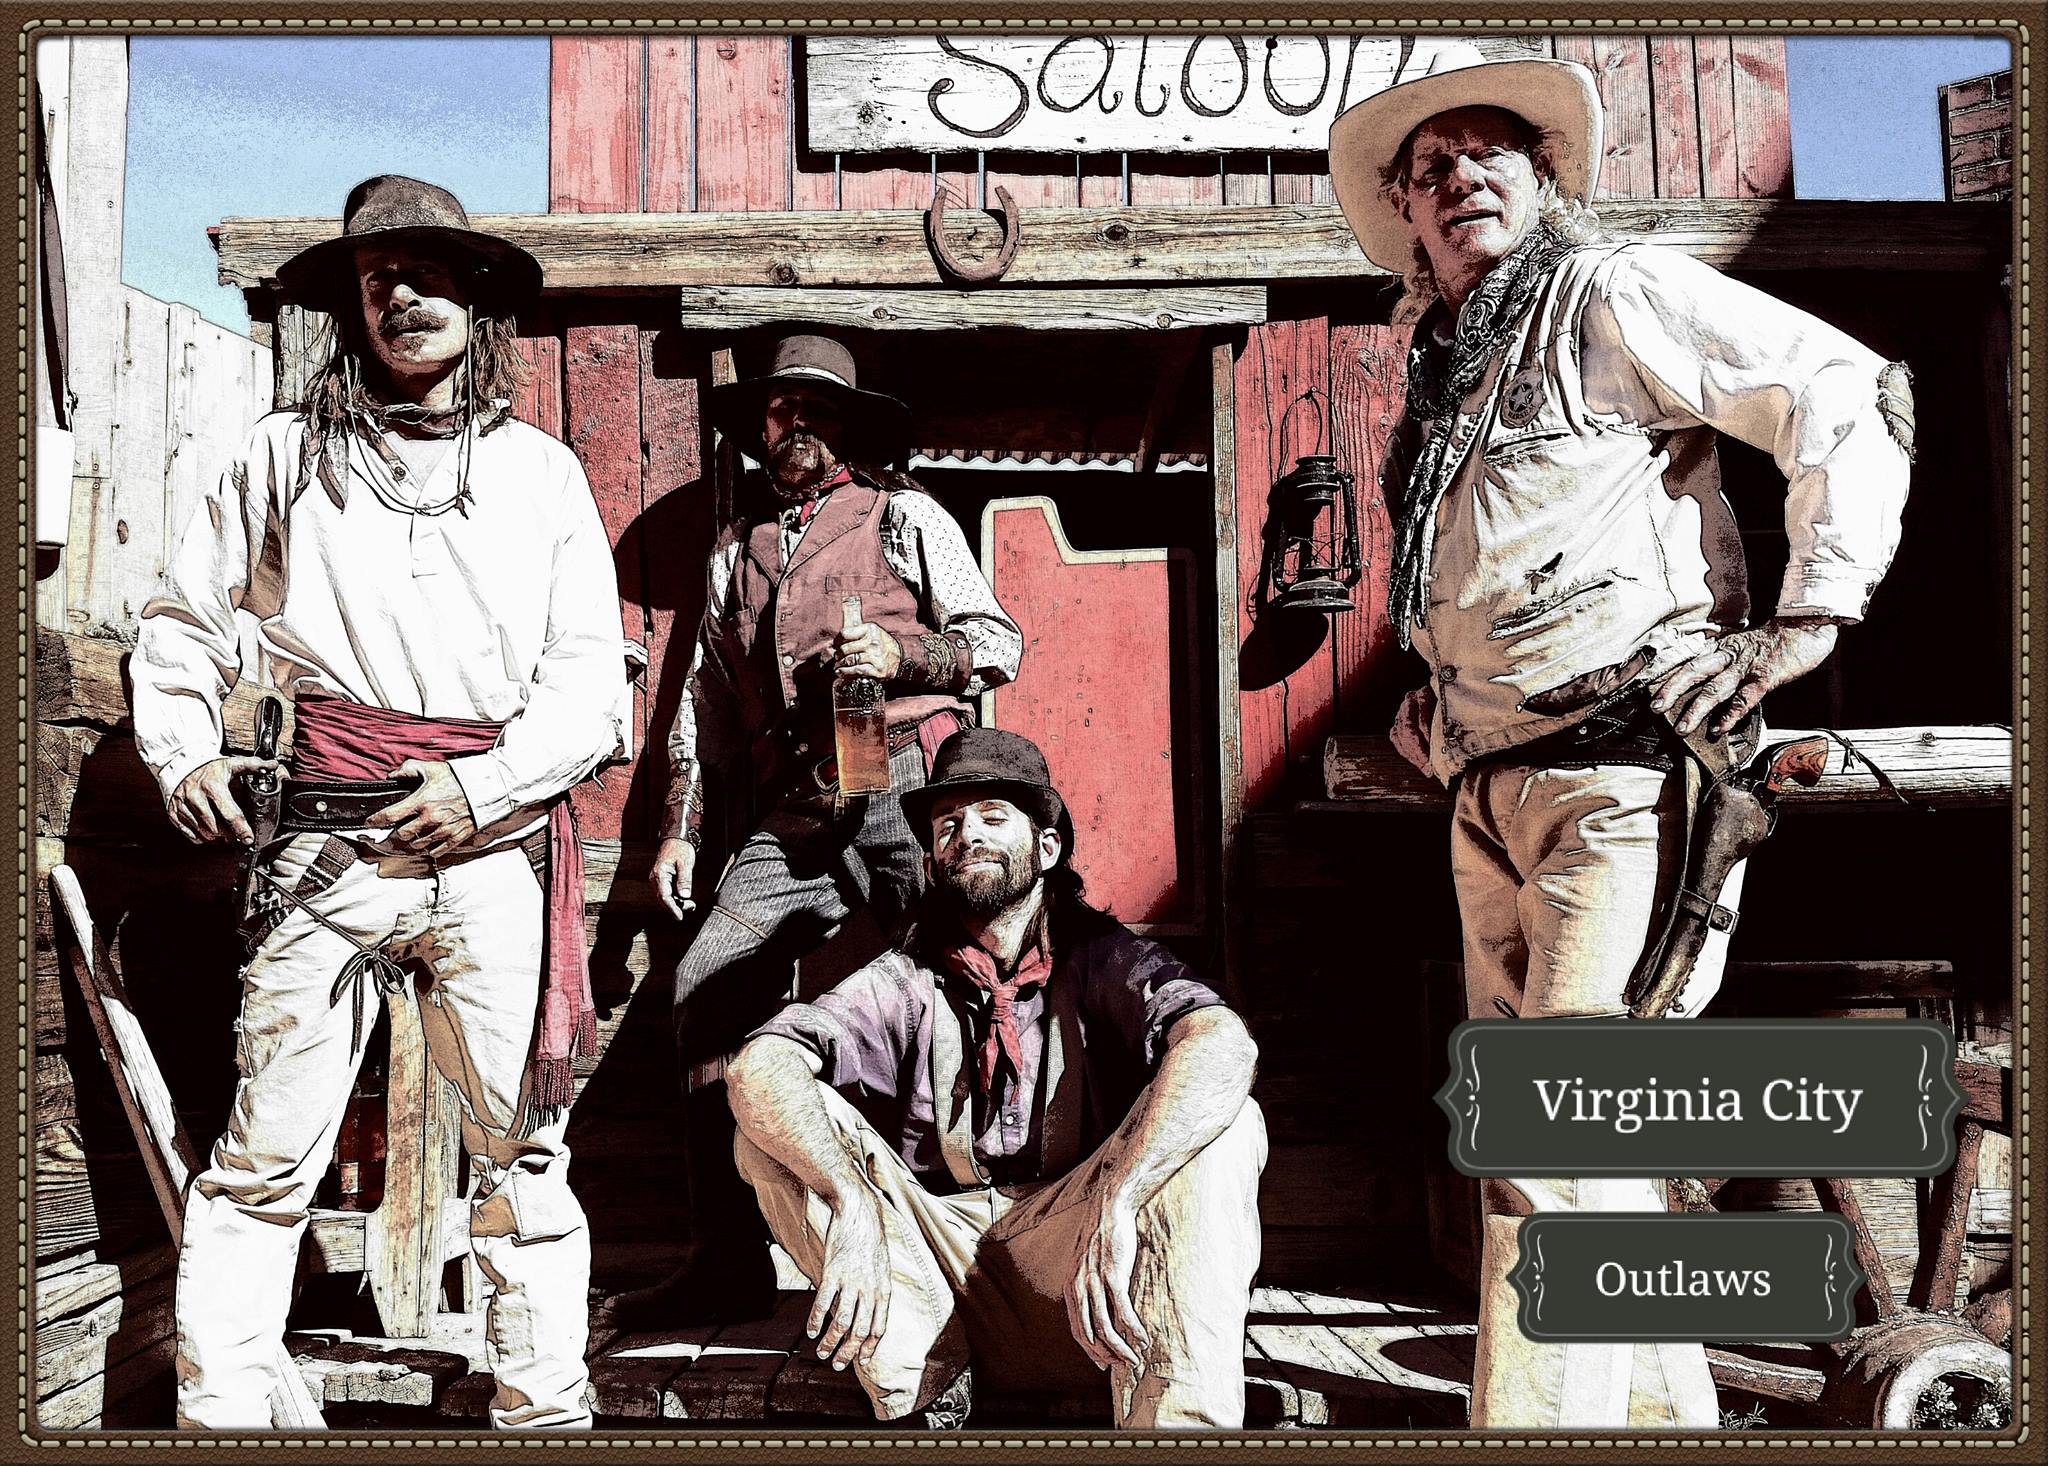 Jack Waggon (Center, Rear) Virginia City Outlaws Wild West Live Theater Show 2014 Season